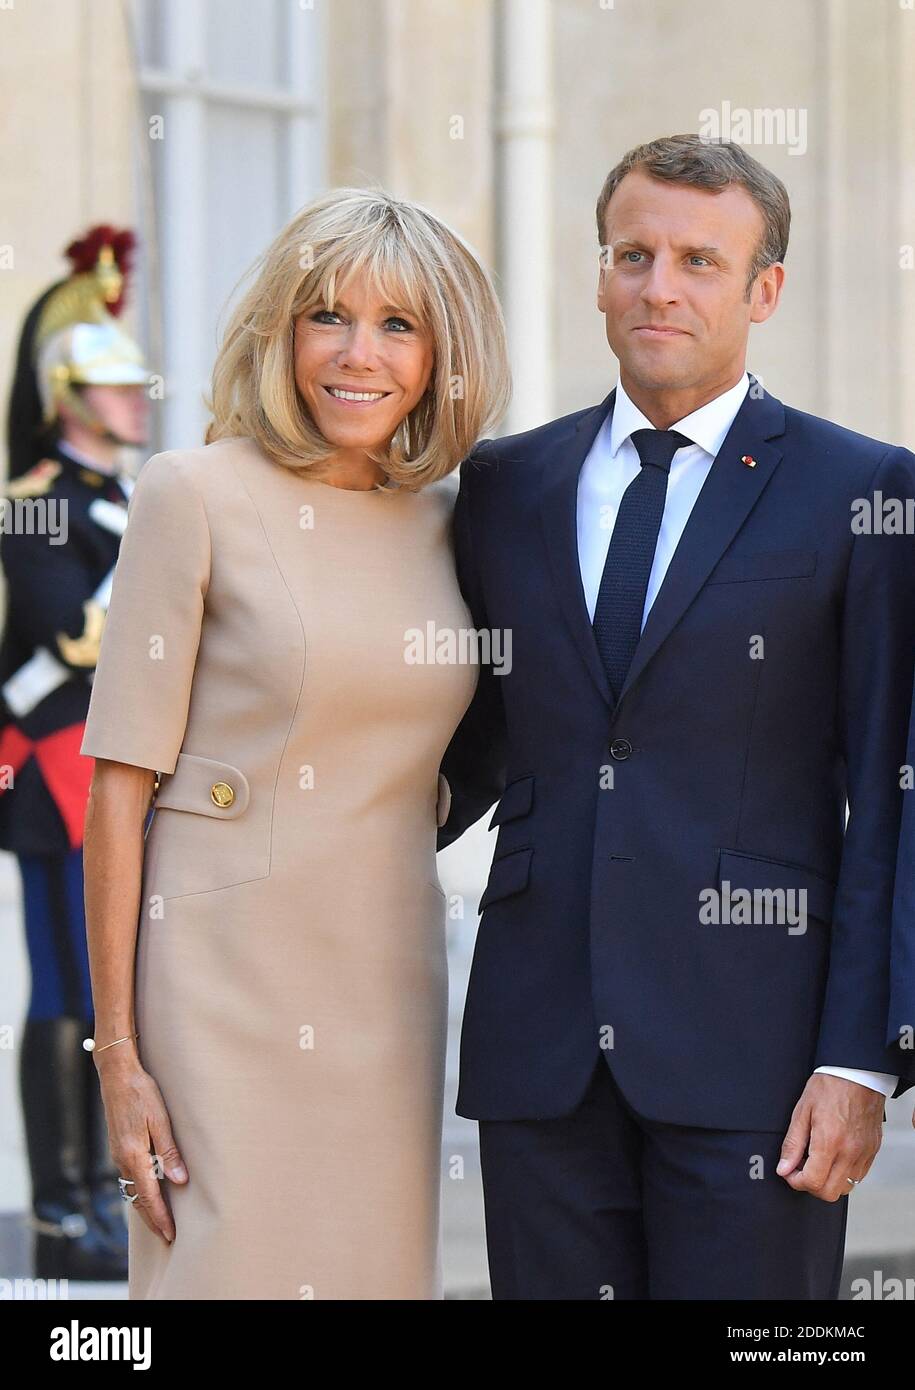 French President Emmanuel Macron and his wife Brigitte Macron wait for the  arrival of the Greek Prime Minister prior to a meeting at the Elysee Palace  in Paris on August 22, 2019.